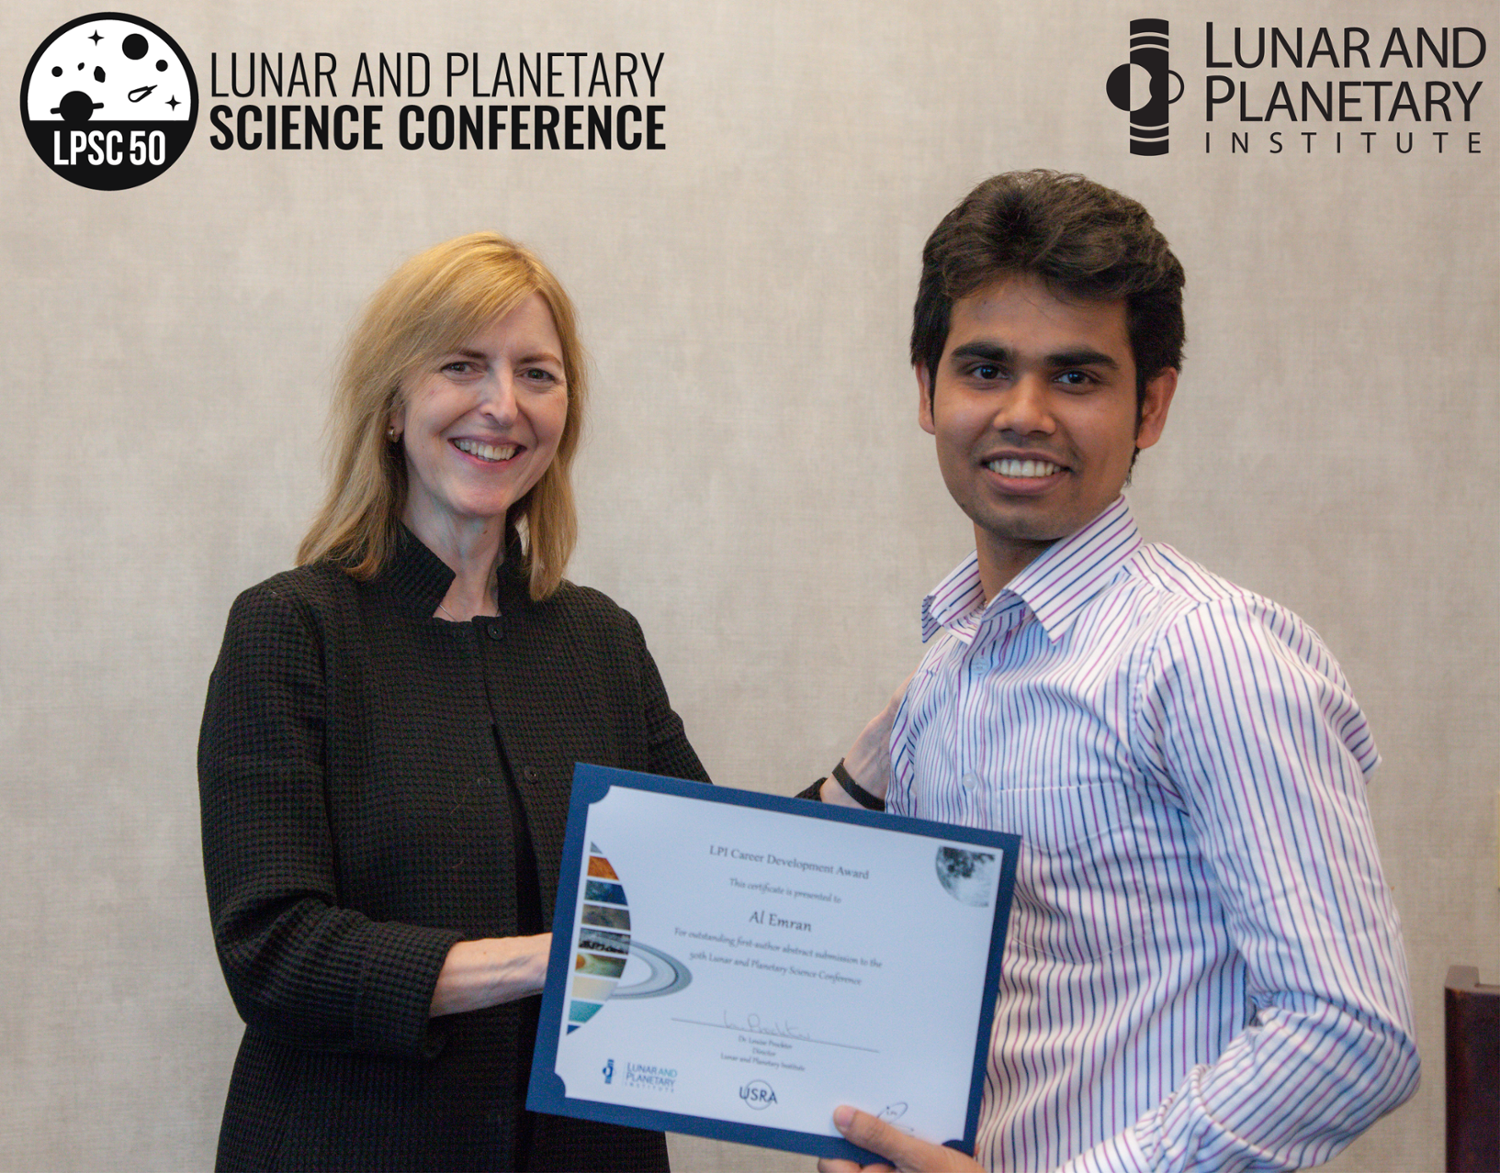 COSAM Student Selected for the Lunar and Planetary Institute Career Development Award